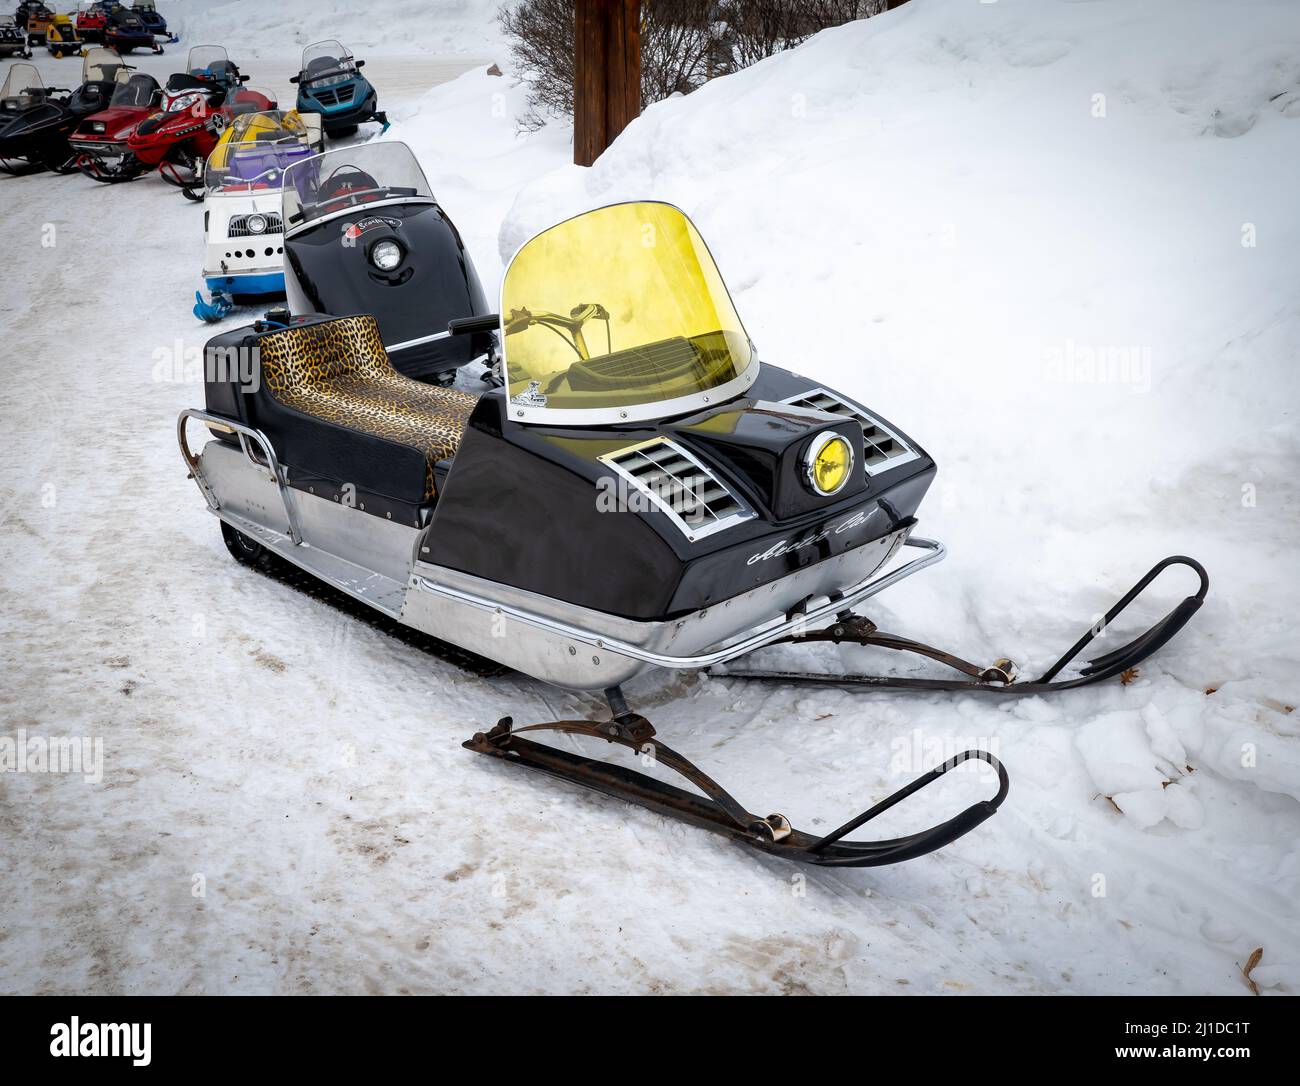 NISSWA, MN - 5 JAN 2022: Old Arctic Cat Panther snowmobile sits on the snow of a parking lot with other sleds. A black 1970s vintage sled with tinted Stock Photo